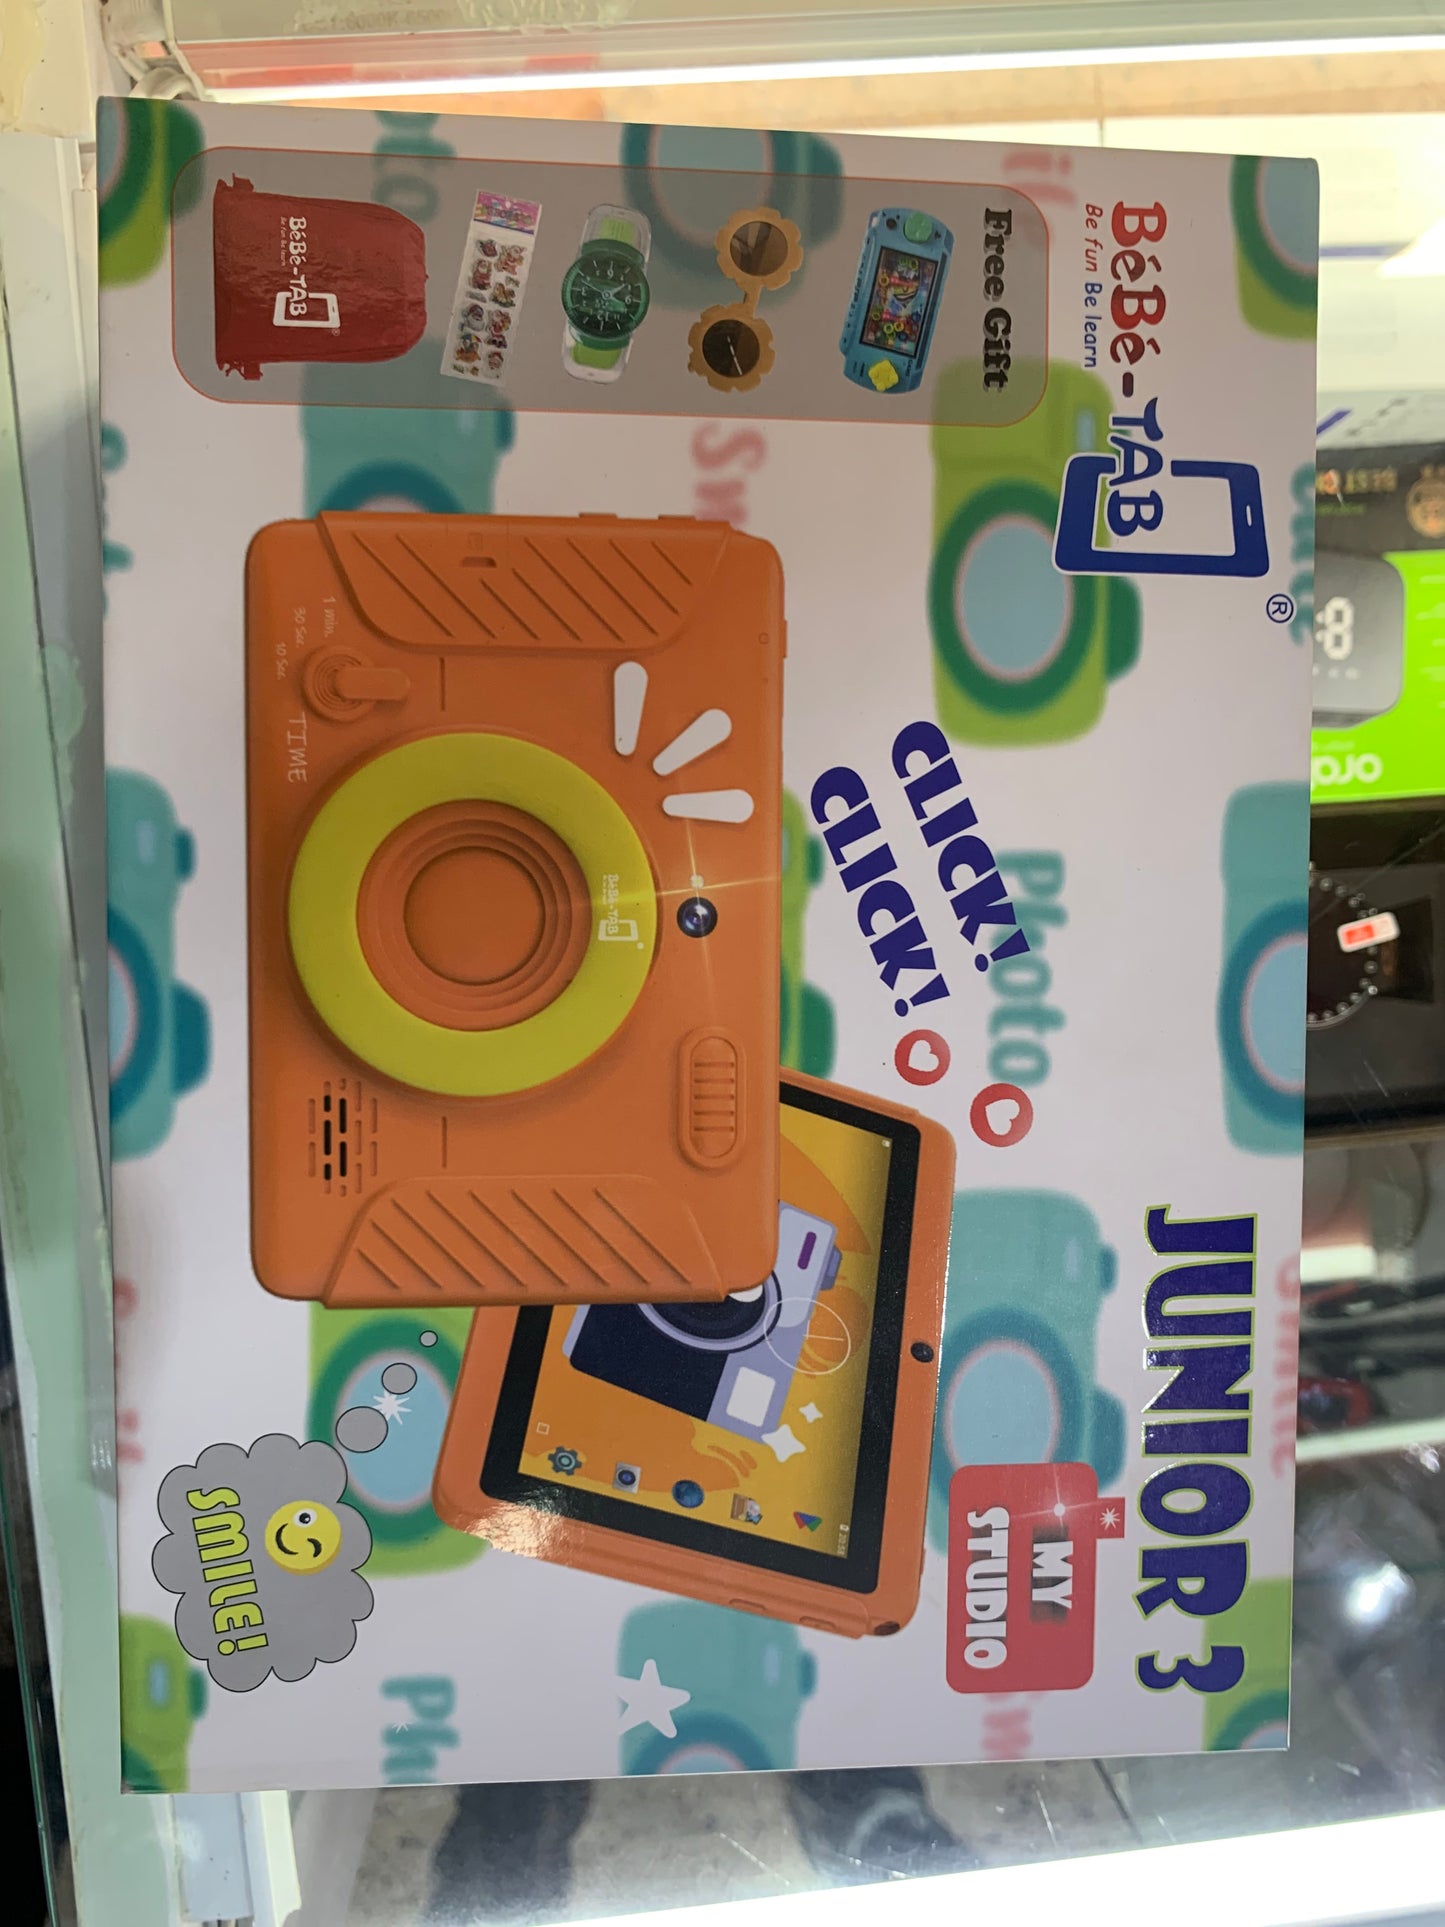 Bebe Tab Junior 3 Kids Learning Tablet, Android 12 (wifi only )